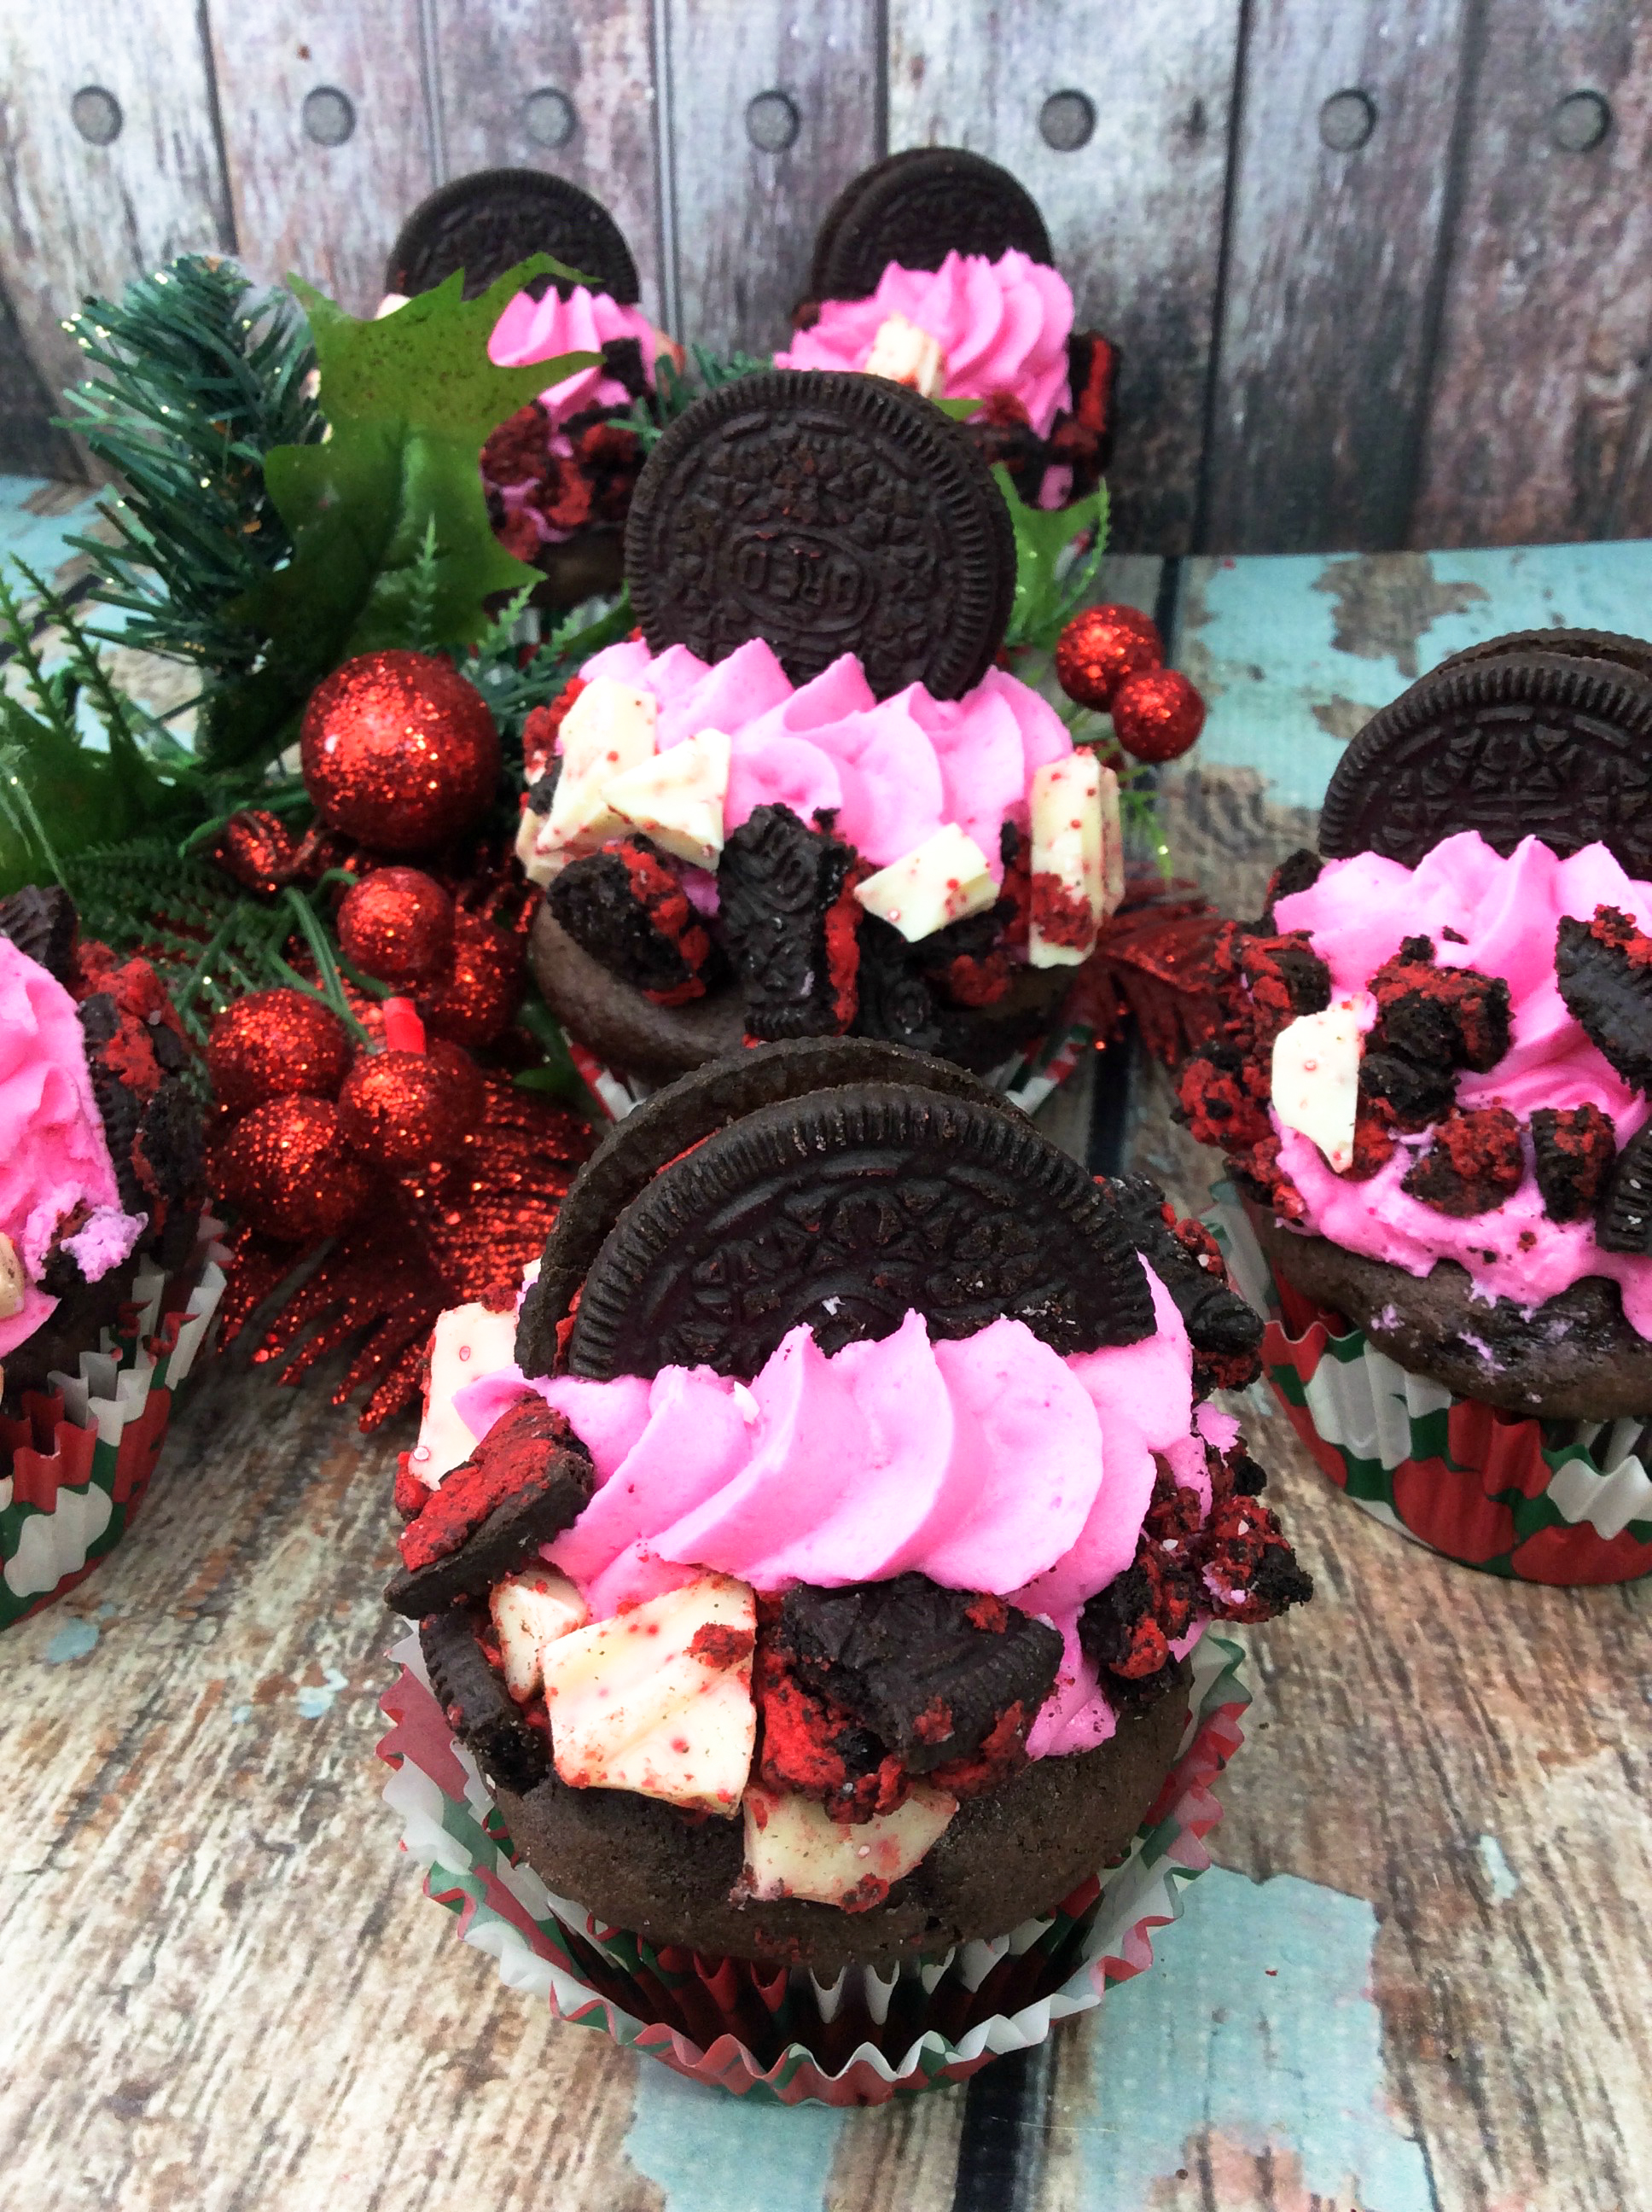 Looking for a delicious and easy chocolate cupcake recipe? This peppermint chocolate cupcake that is topped with Oreos is a fantastic Christmas dessert or for anytime. Try these fantastic peppermint Oreo cupcakes. #cupcakes #Oreo #dessert